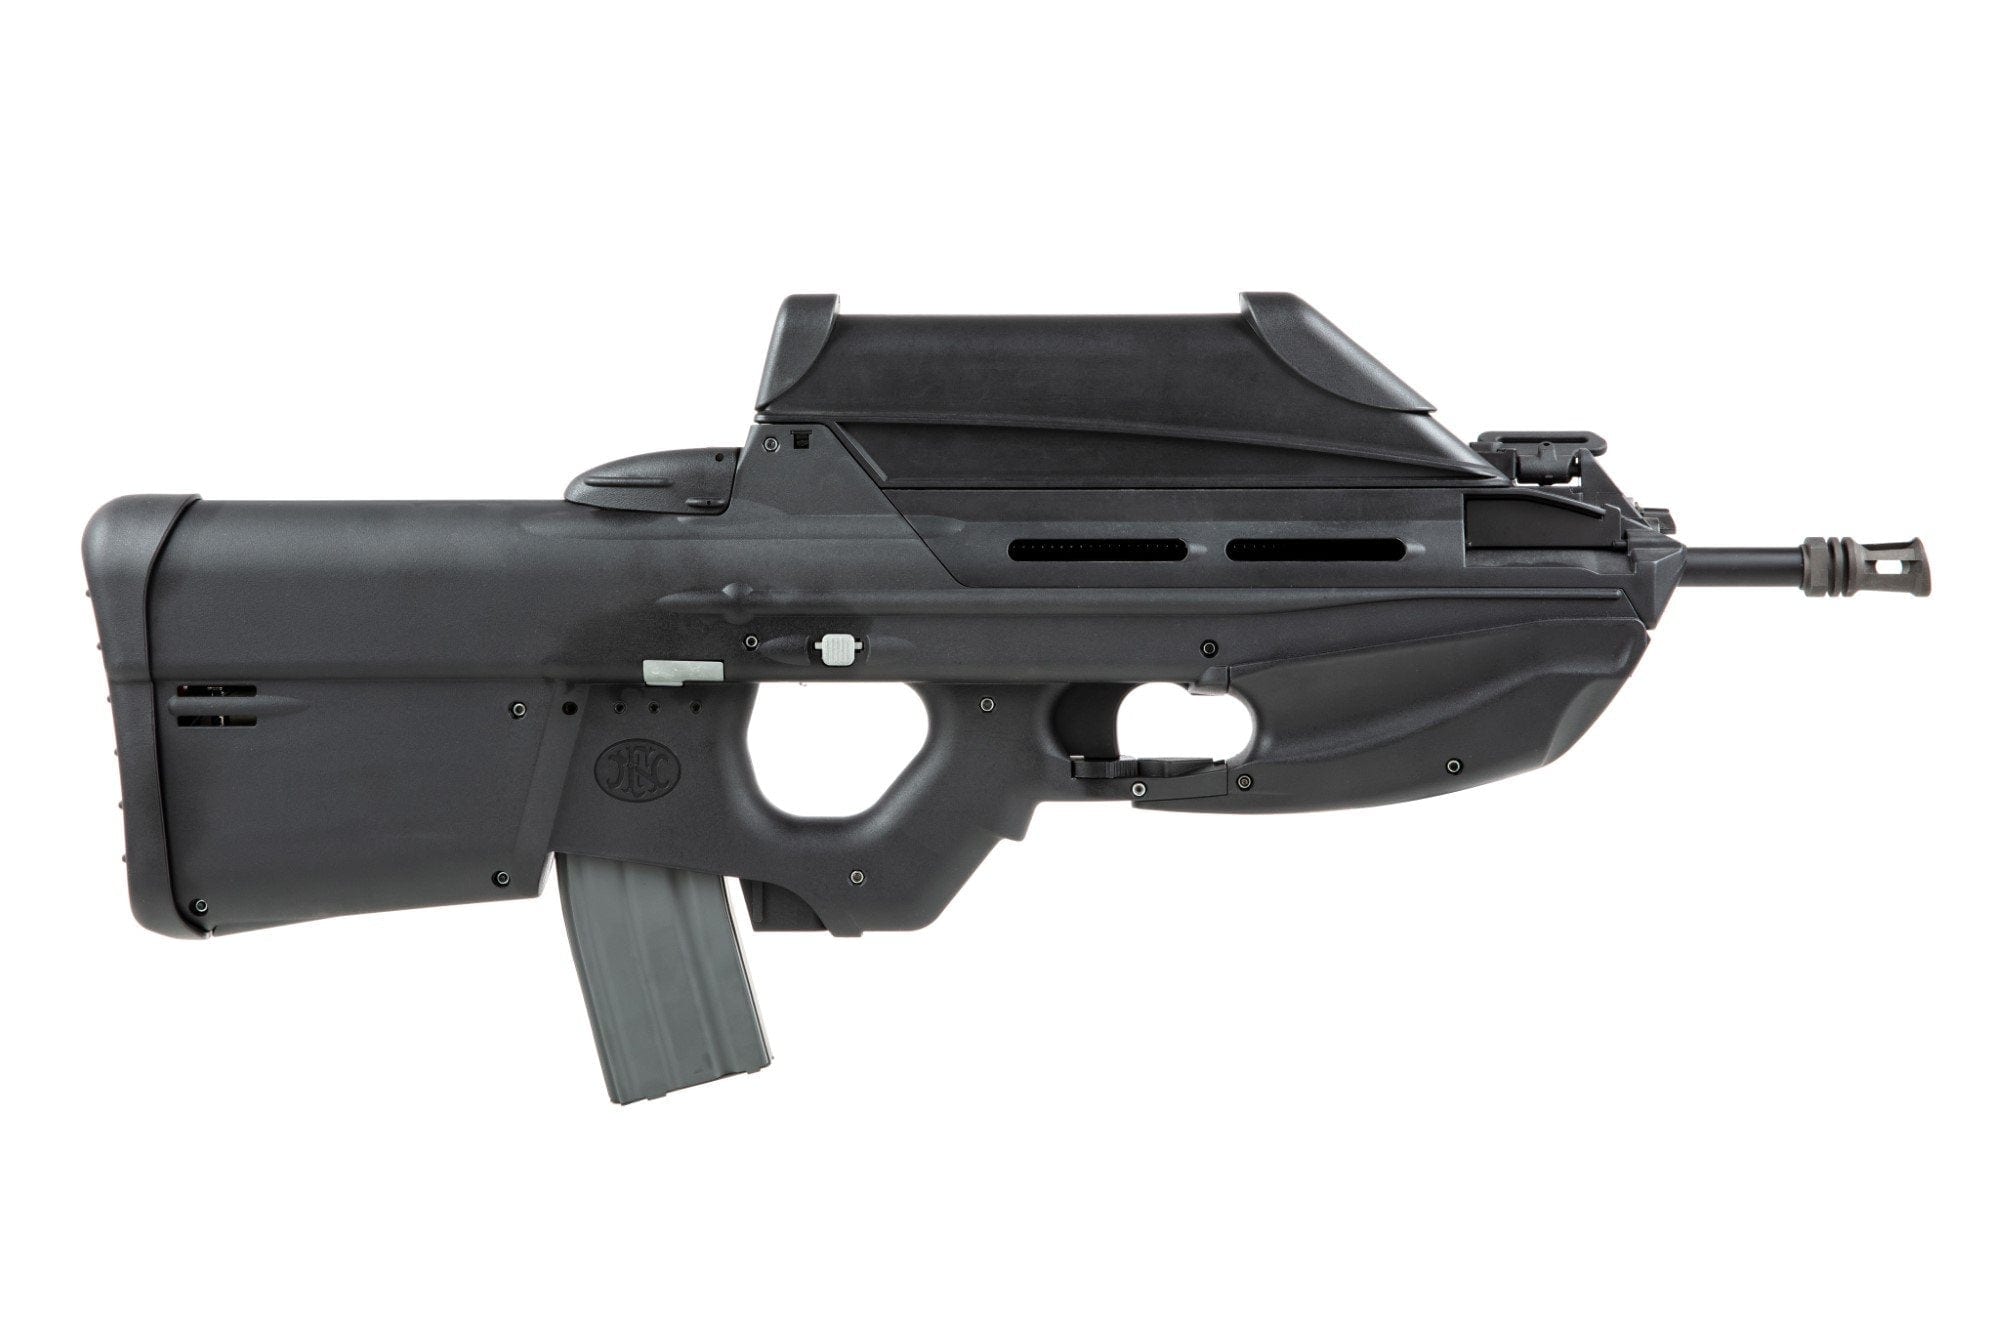 FN F2000 ETU Assault Rifle Replica with Scope - Black by G&G on Airsoft Mania Europe